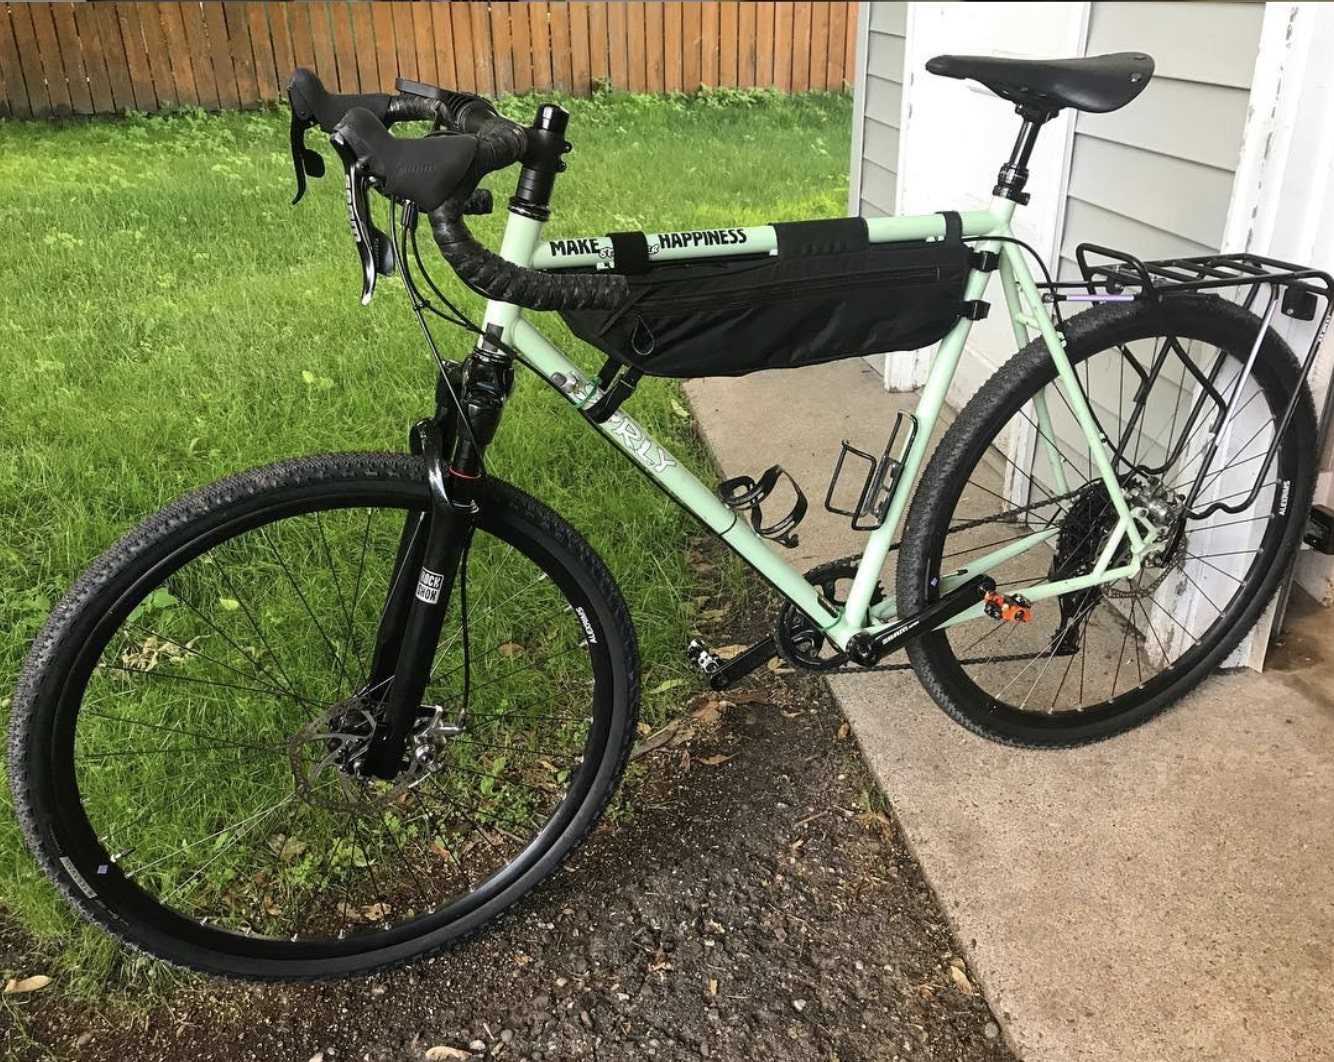 Left side of Surly Straggler bike, mint green, with rear gear rack leans on a doorway near a grassy yard with wood fence